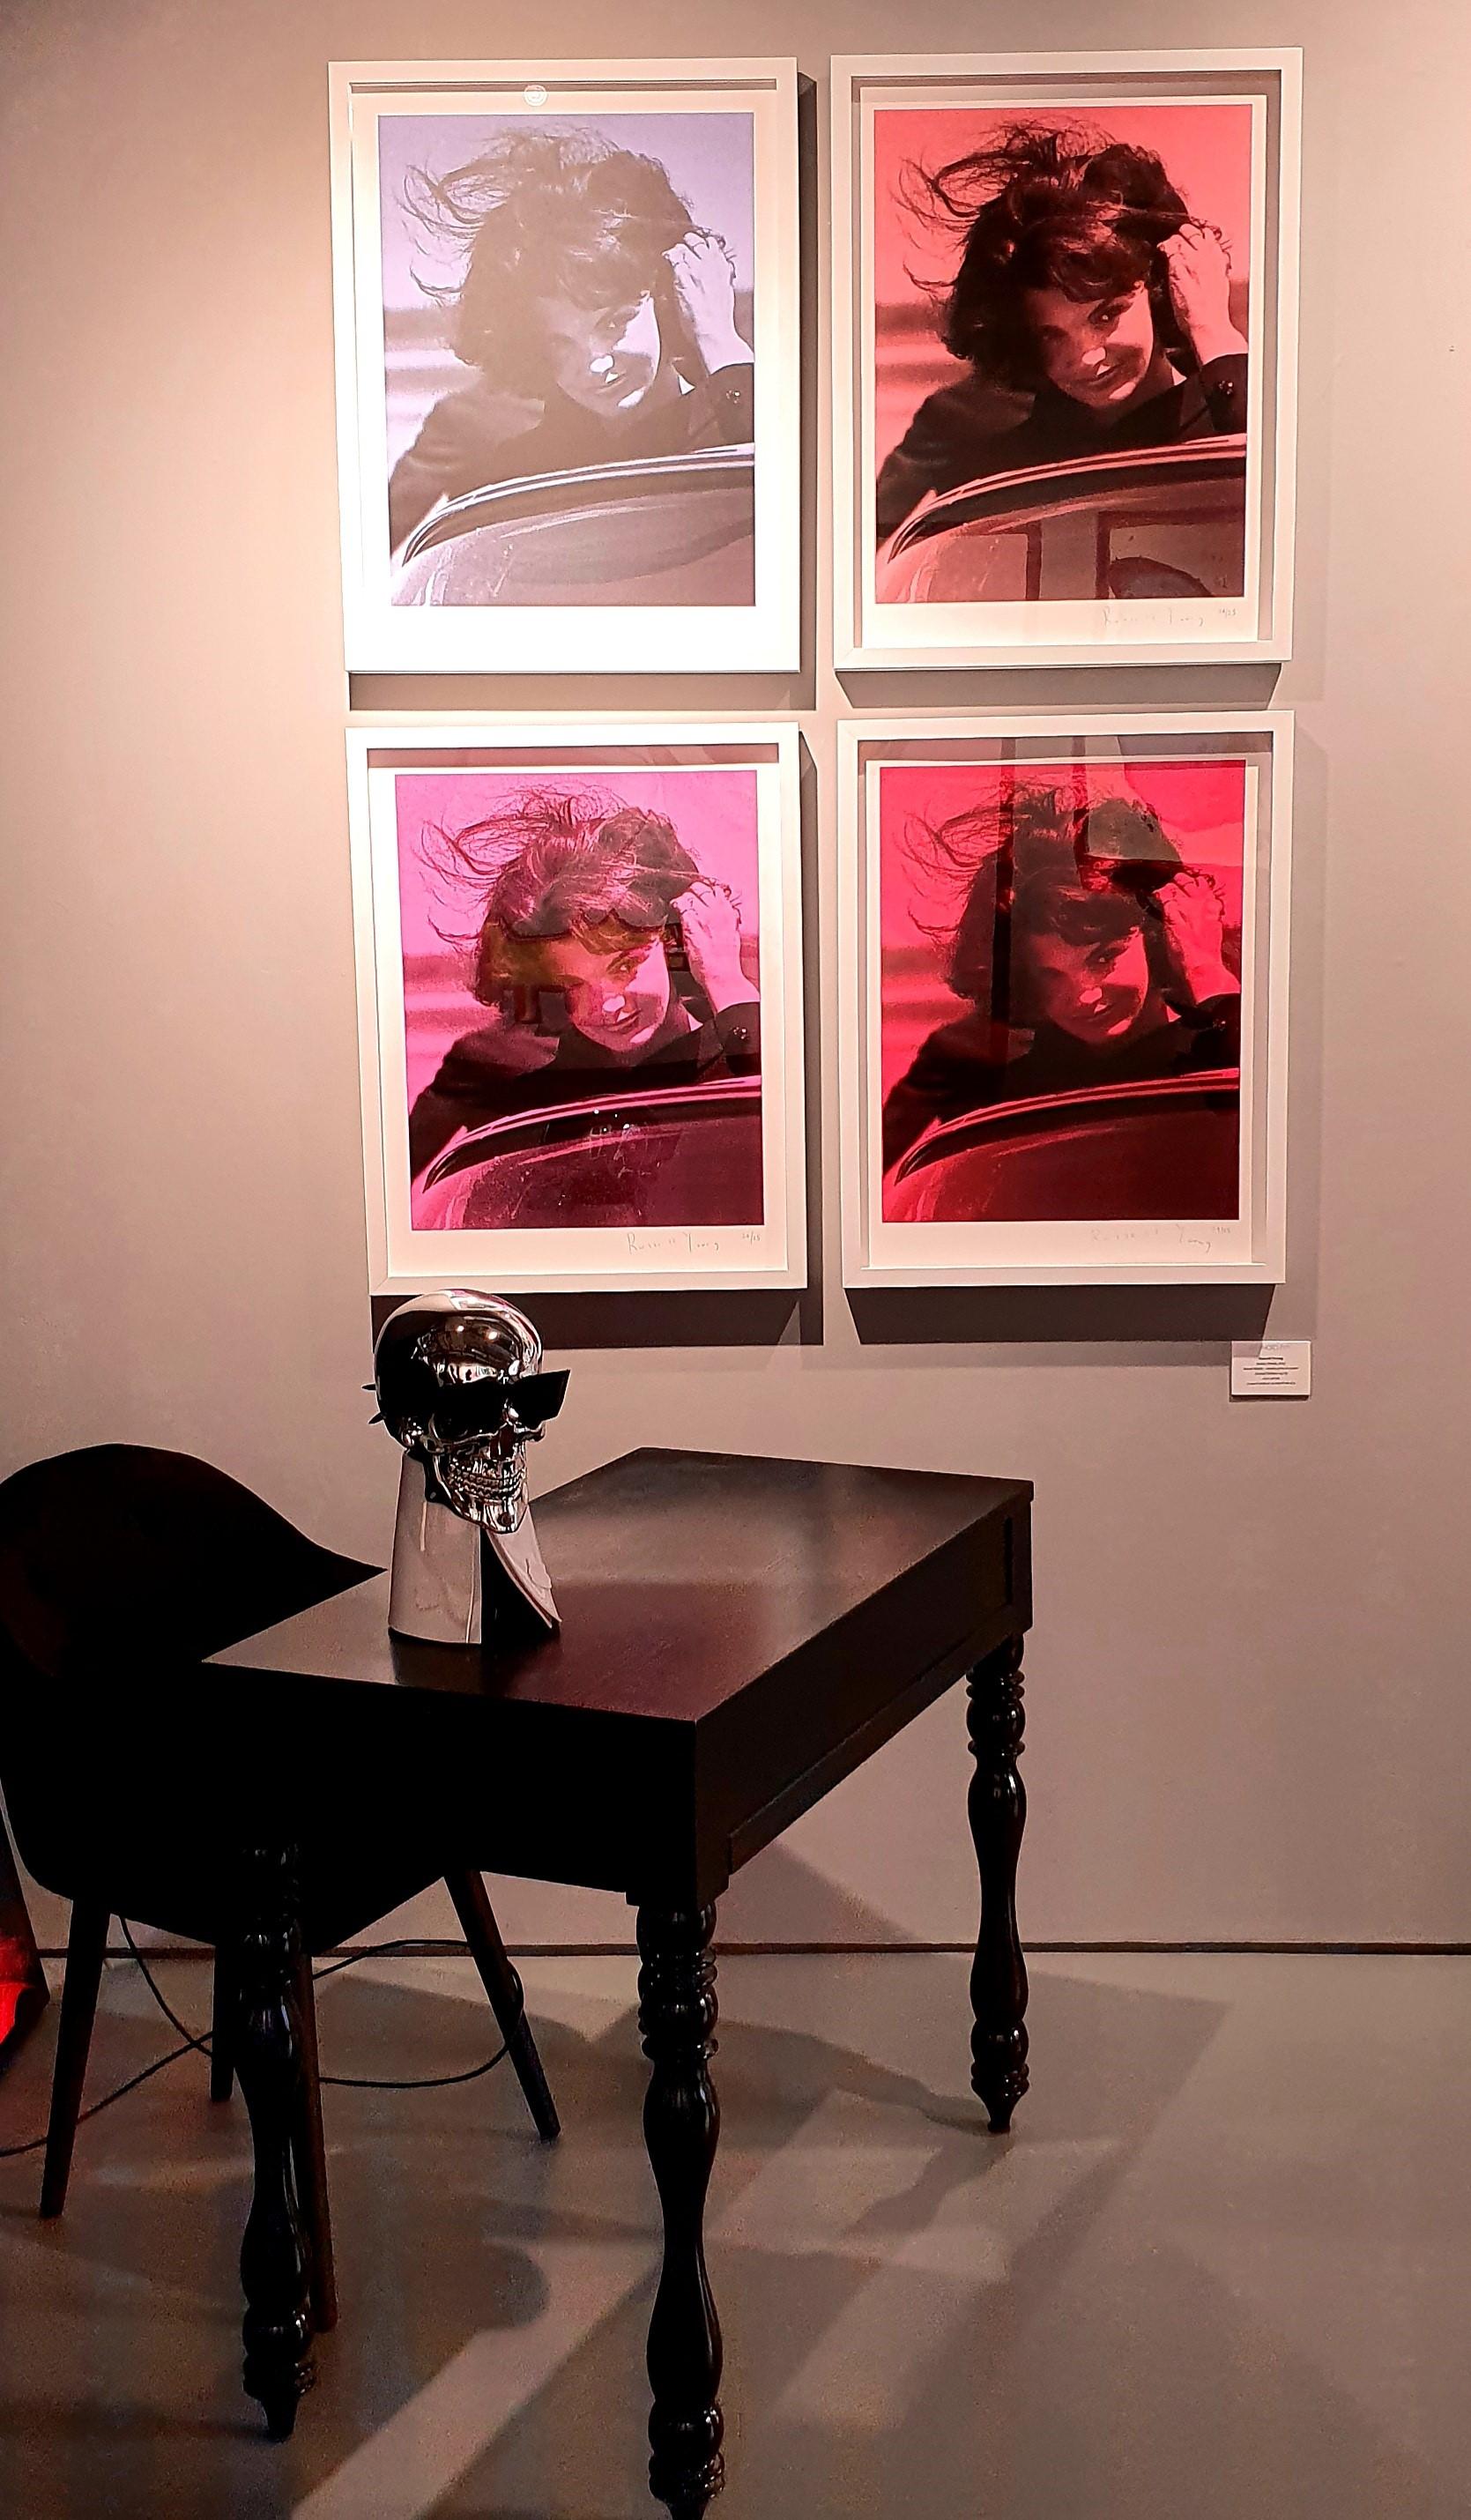 Set of 4 artworks , Limited ediiton number 24 on 25 .numbered and signed on each print - Total size 155 x 120 cm
White wood frame and glass
About the artist :
Russell Young is a American-British Pop artist known for his large-scale silkscreen